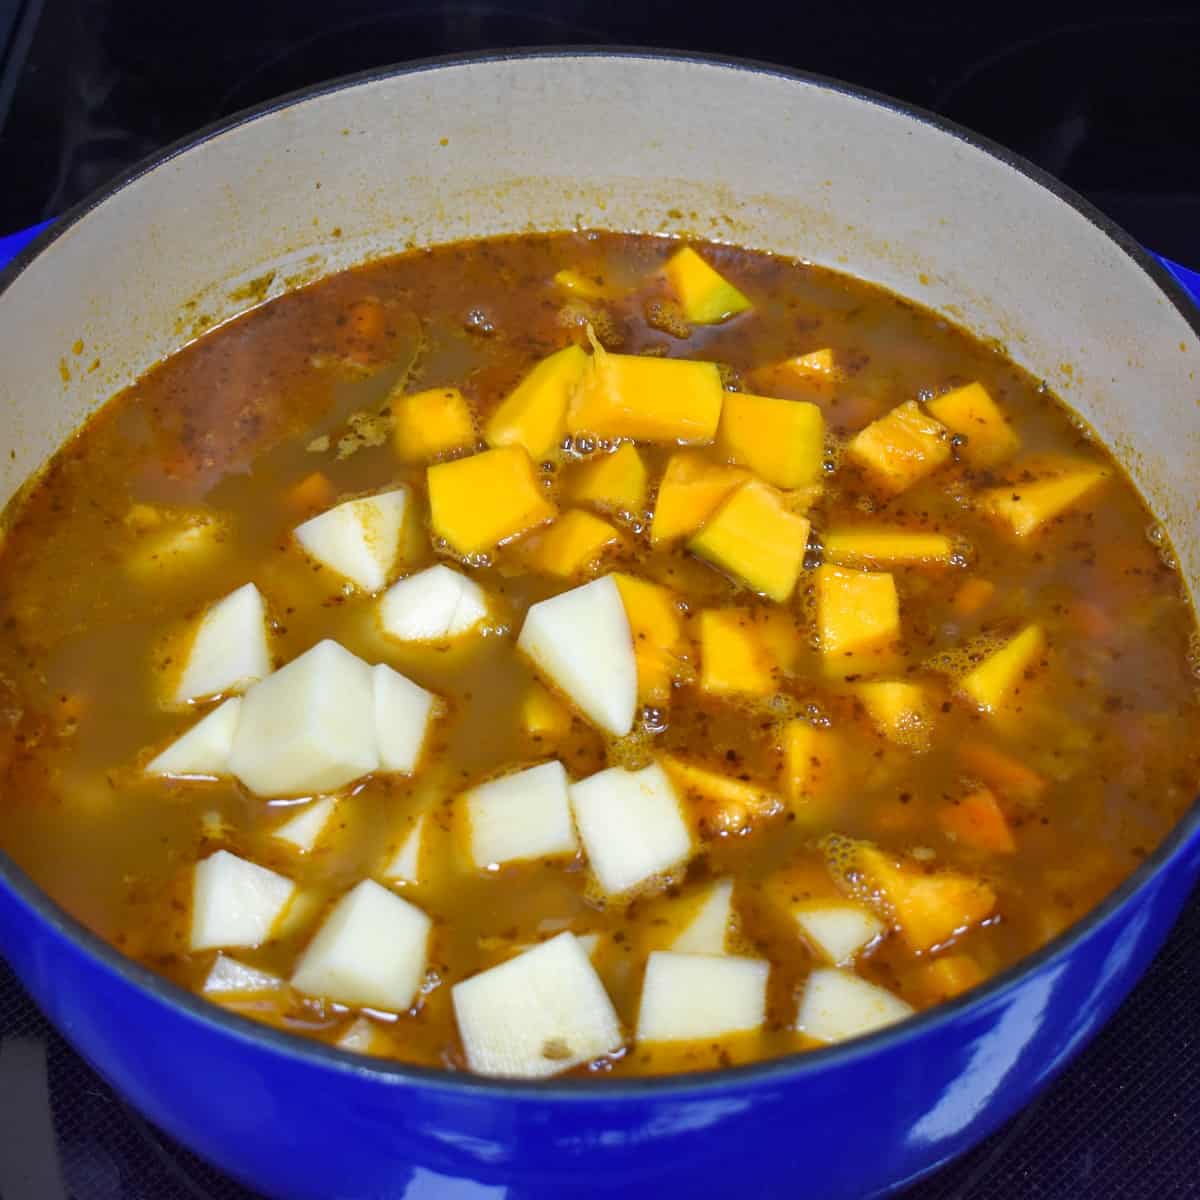 Cut potatoes and pumpkin pieces added to the broth for the soup.